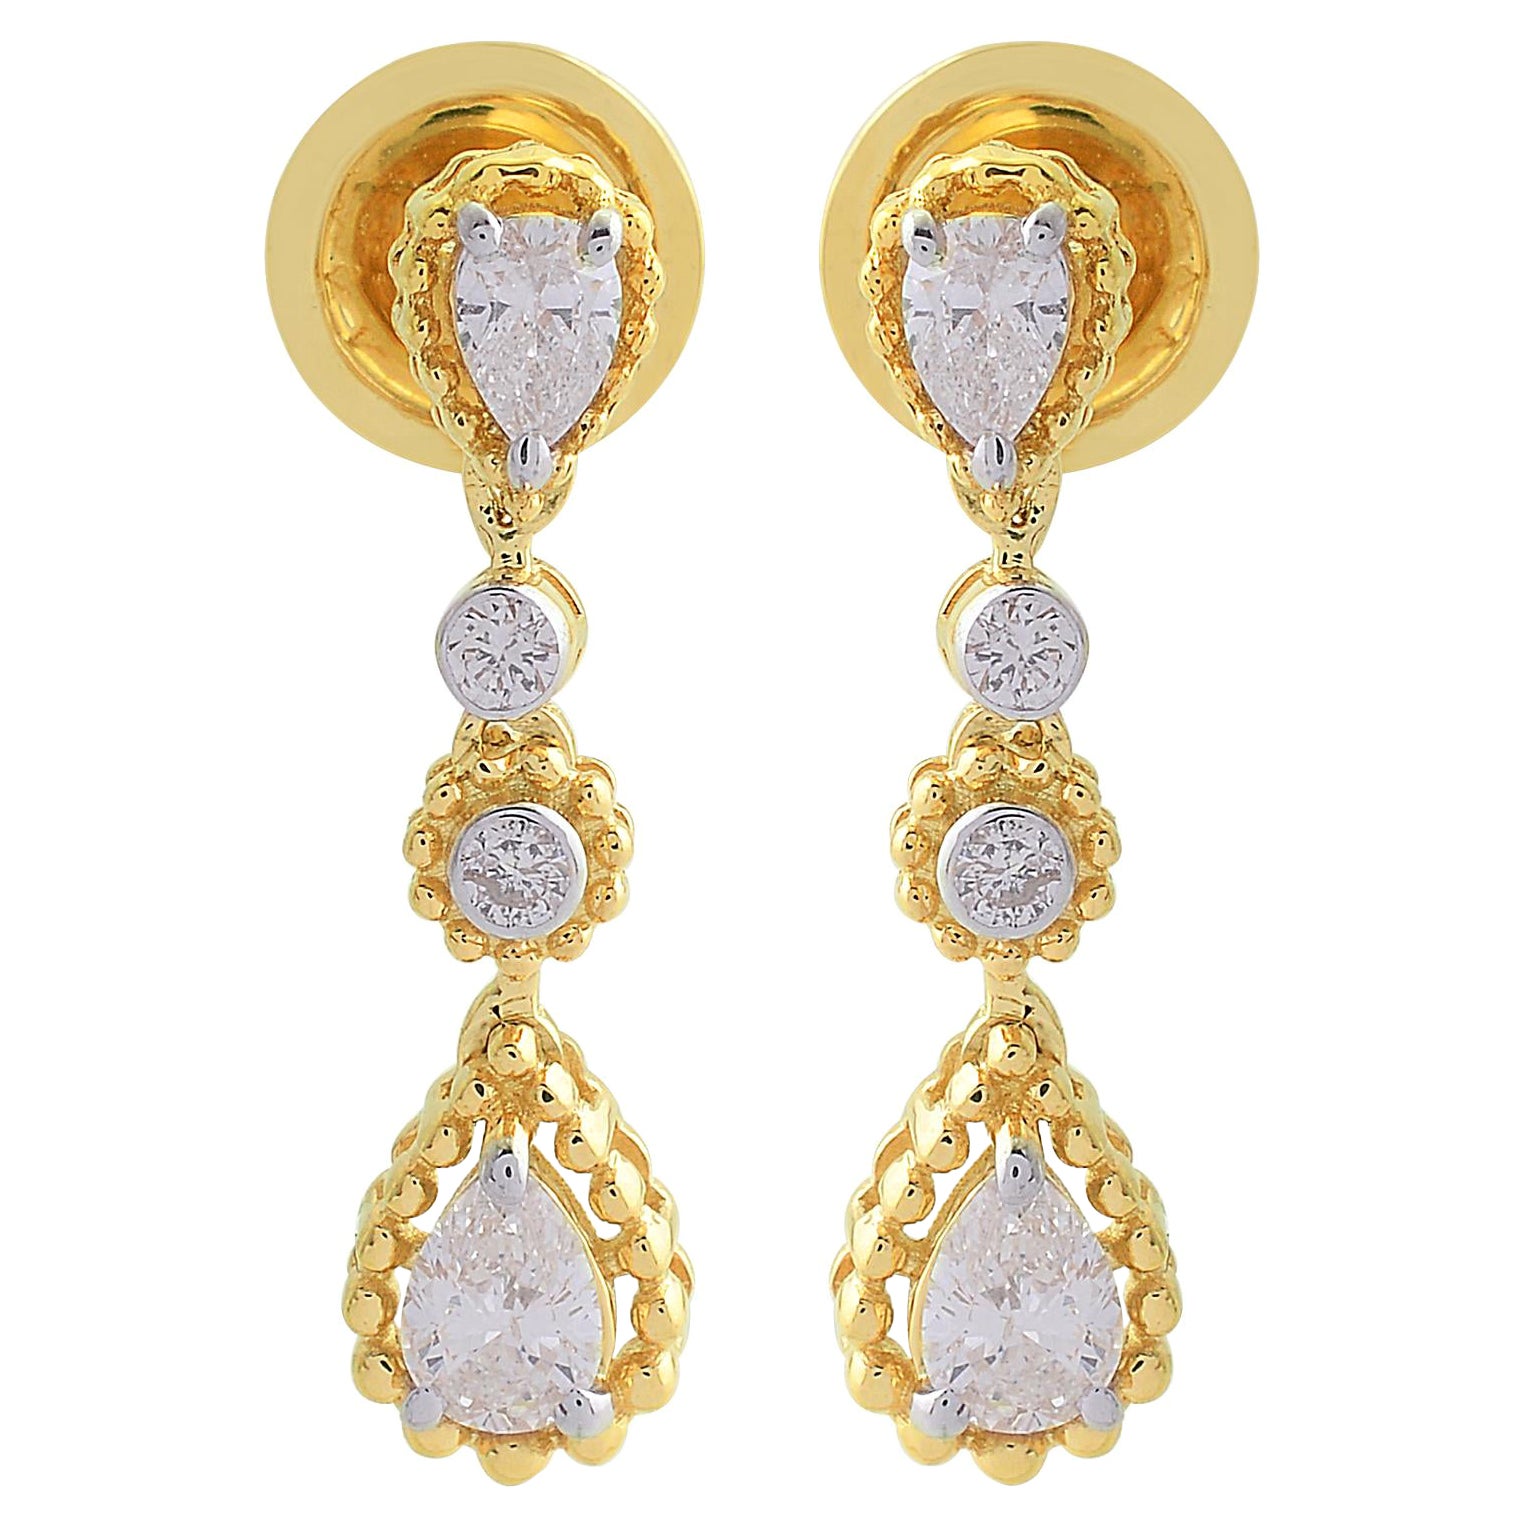 SI Clarity HI Color Pear & Round Diamond Dangle Earrings 18k Yellow Gold Jewelry For Sale